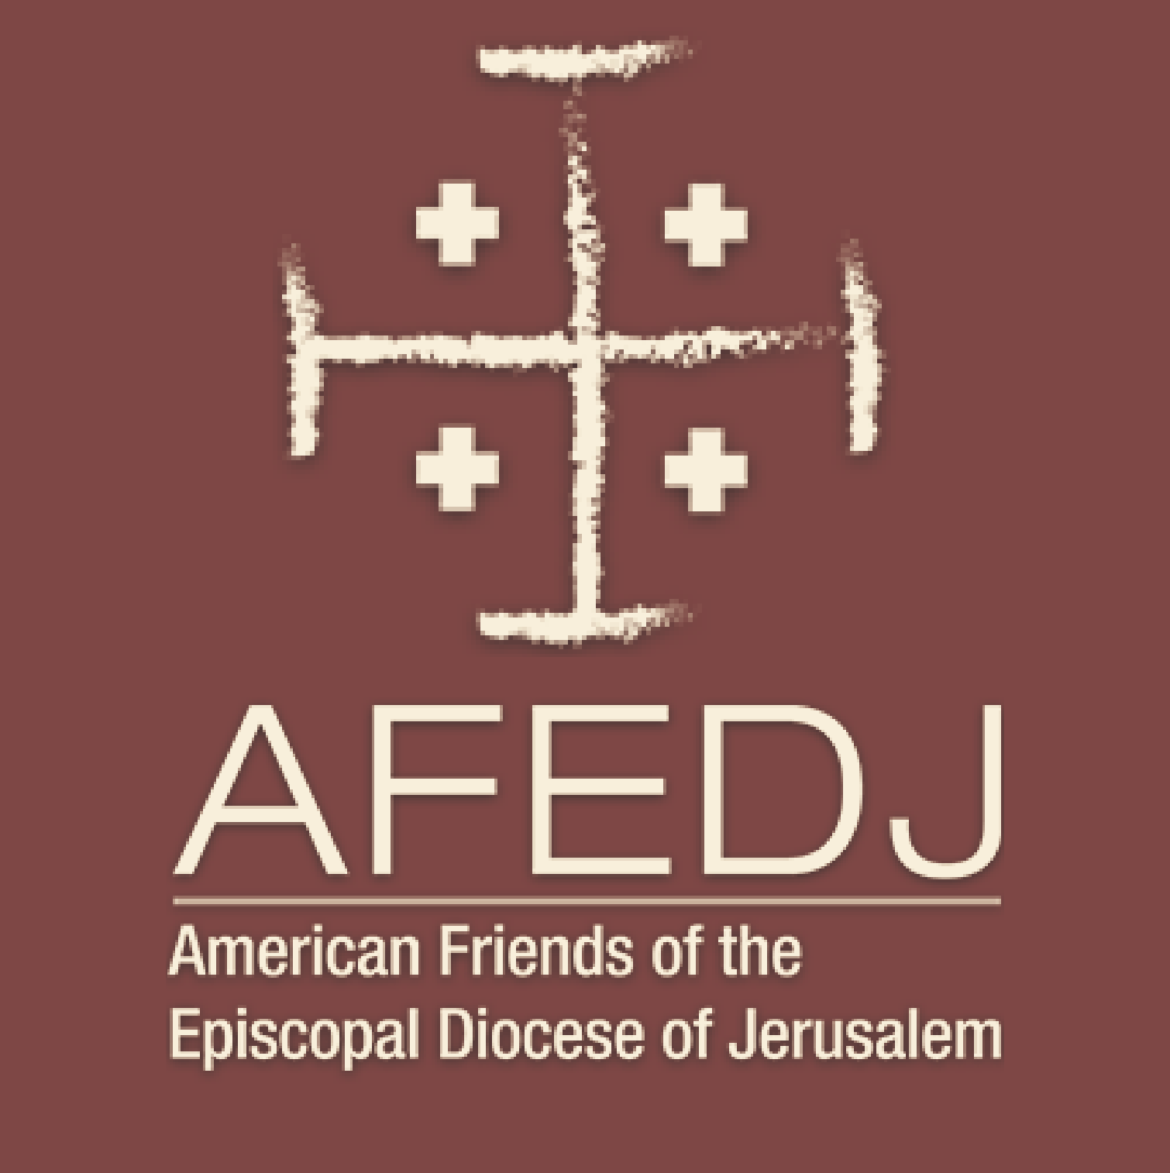 Connections: The American Friends of the Episcopal Diocese of Jerusalem